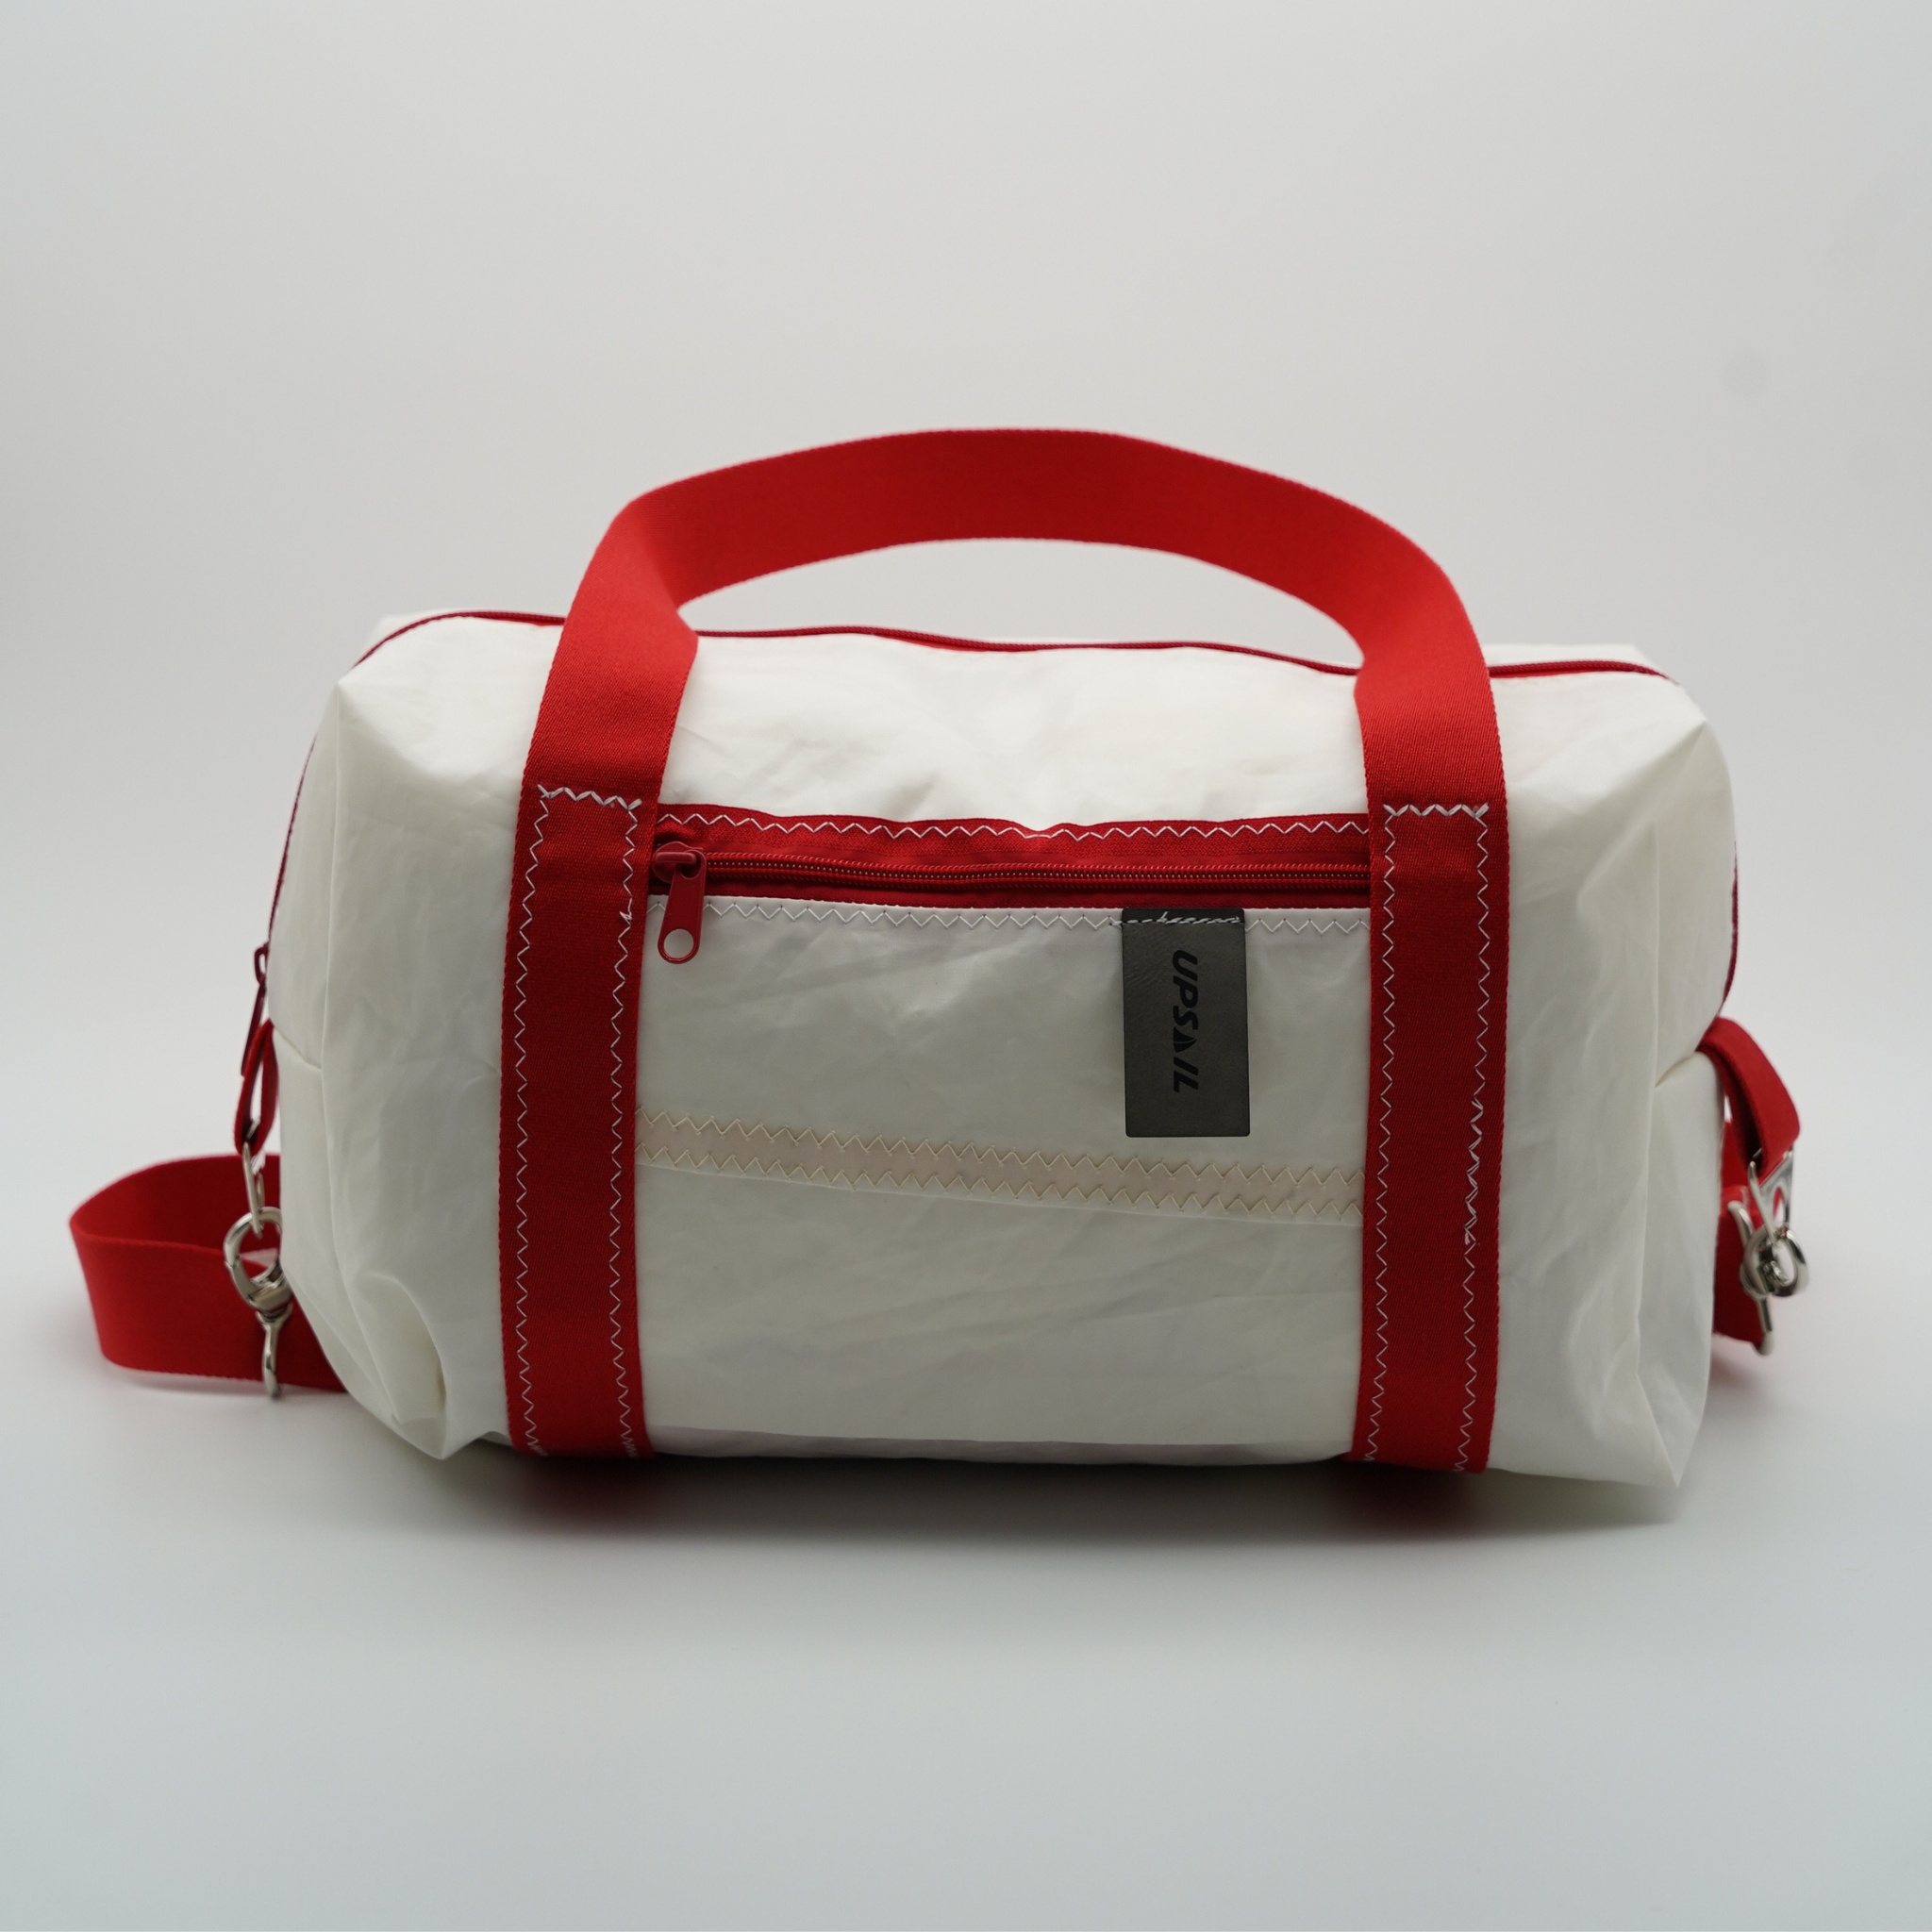 UpSail - Tasche Classic Large Rot